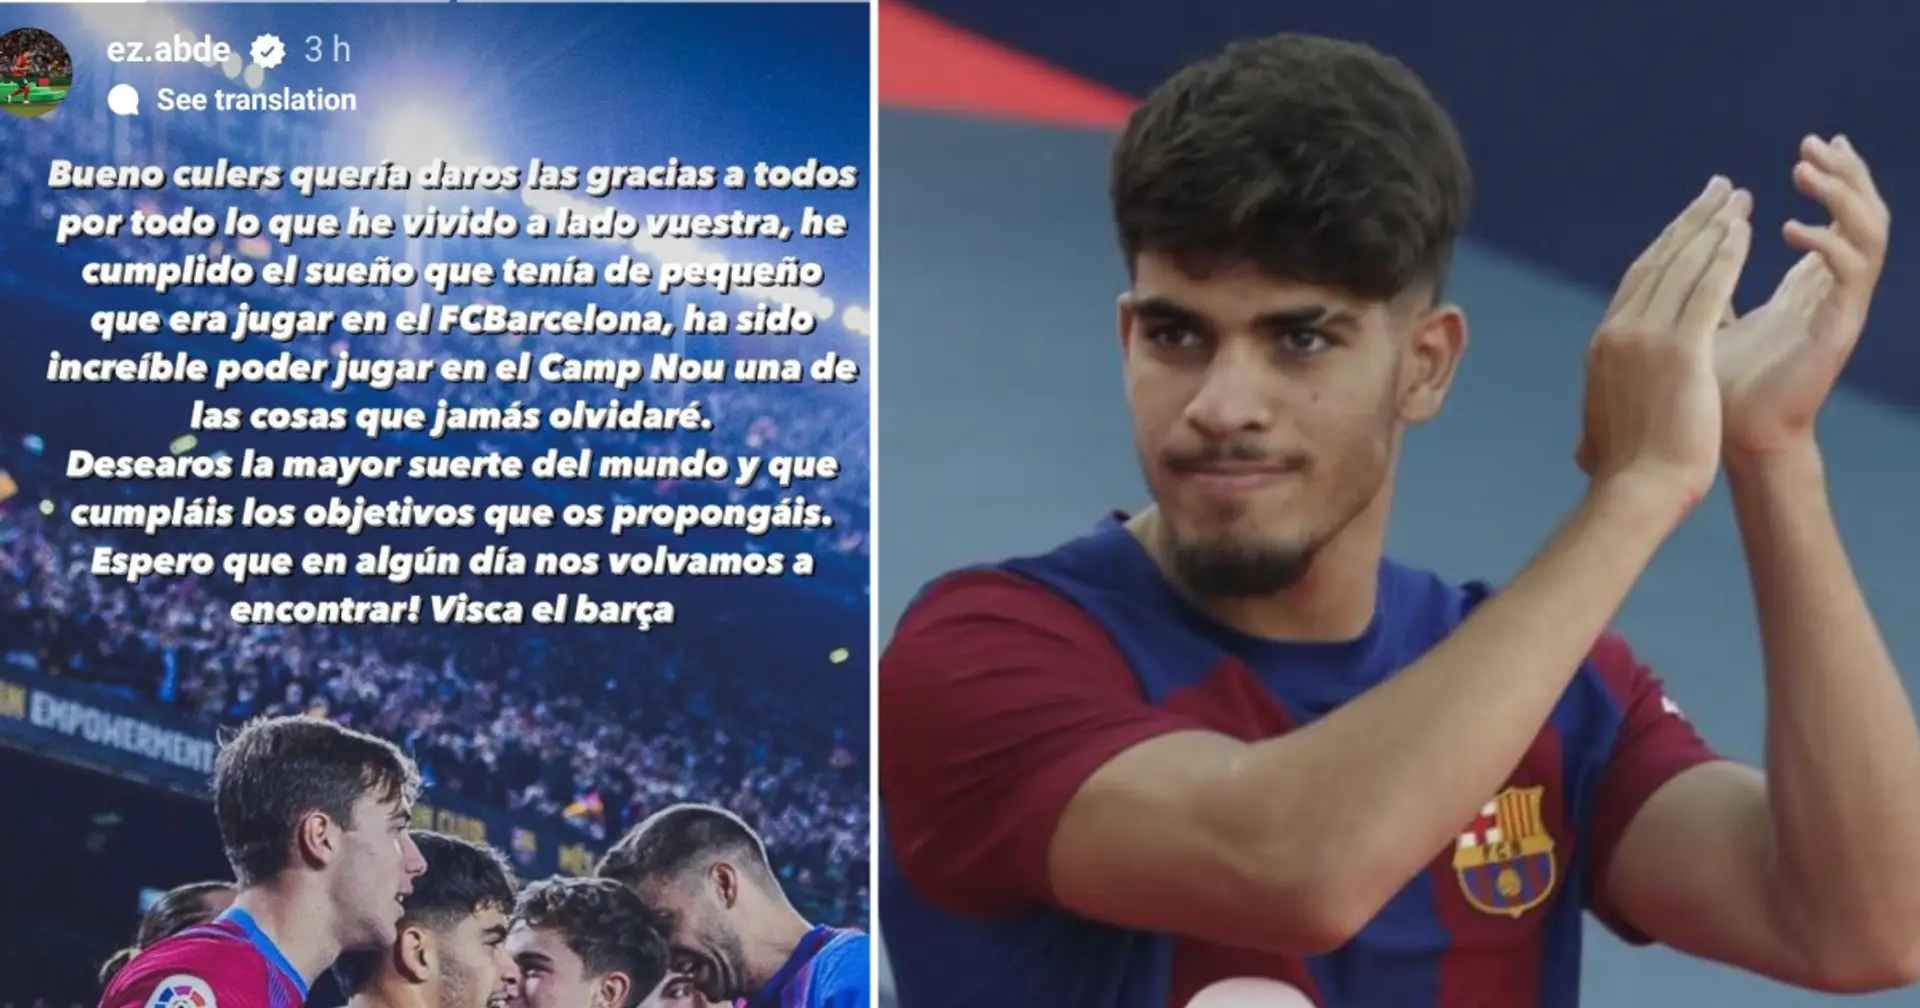 'I hope one day we'll meet again': Ez Abde sends touching farewell message to Cules